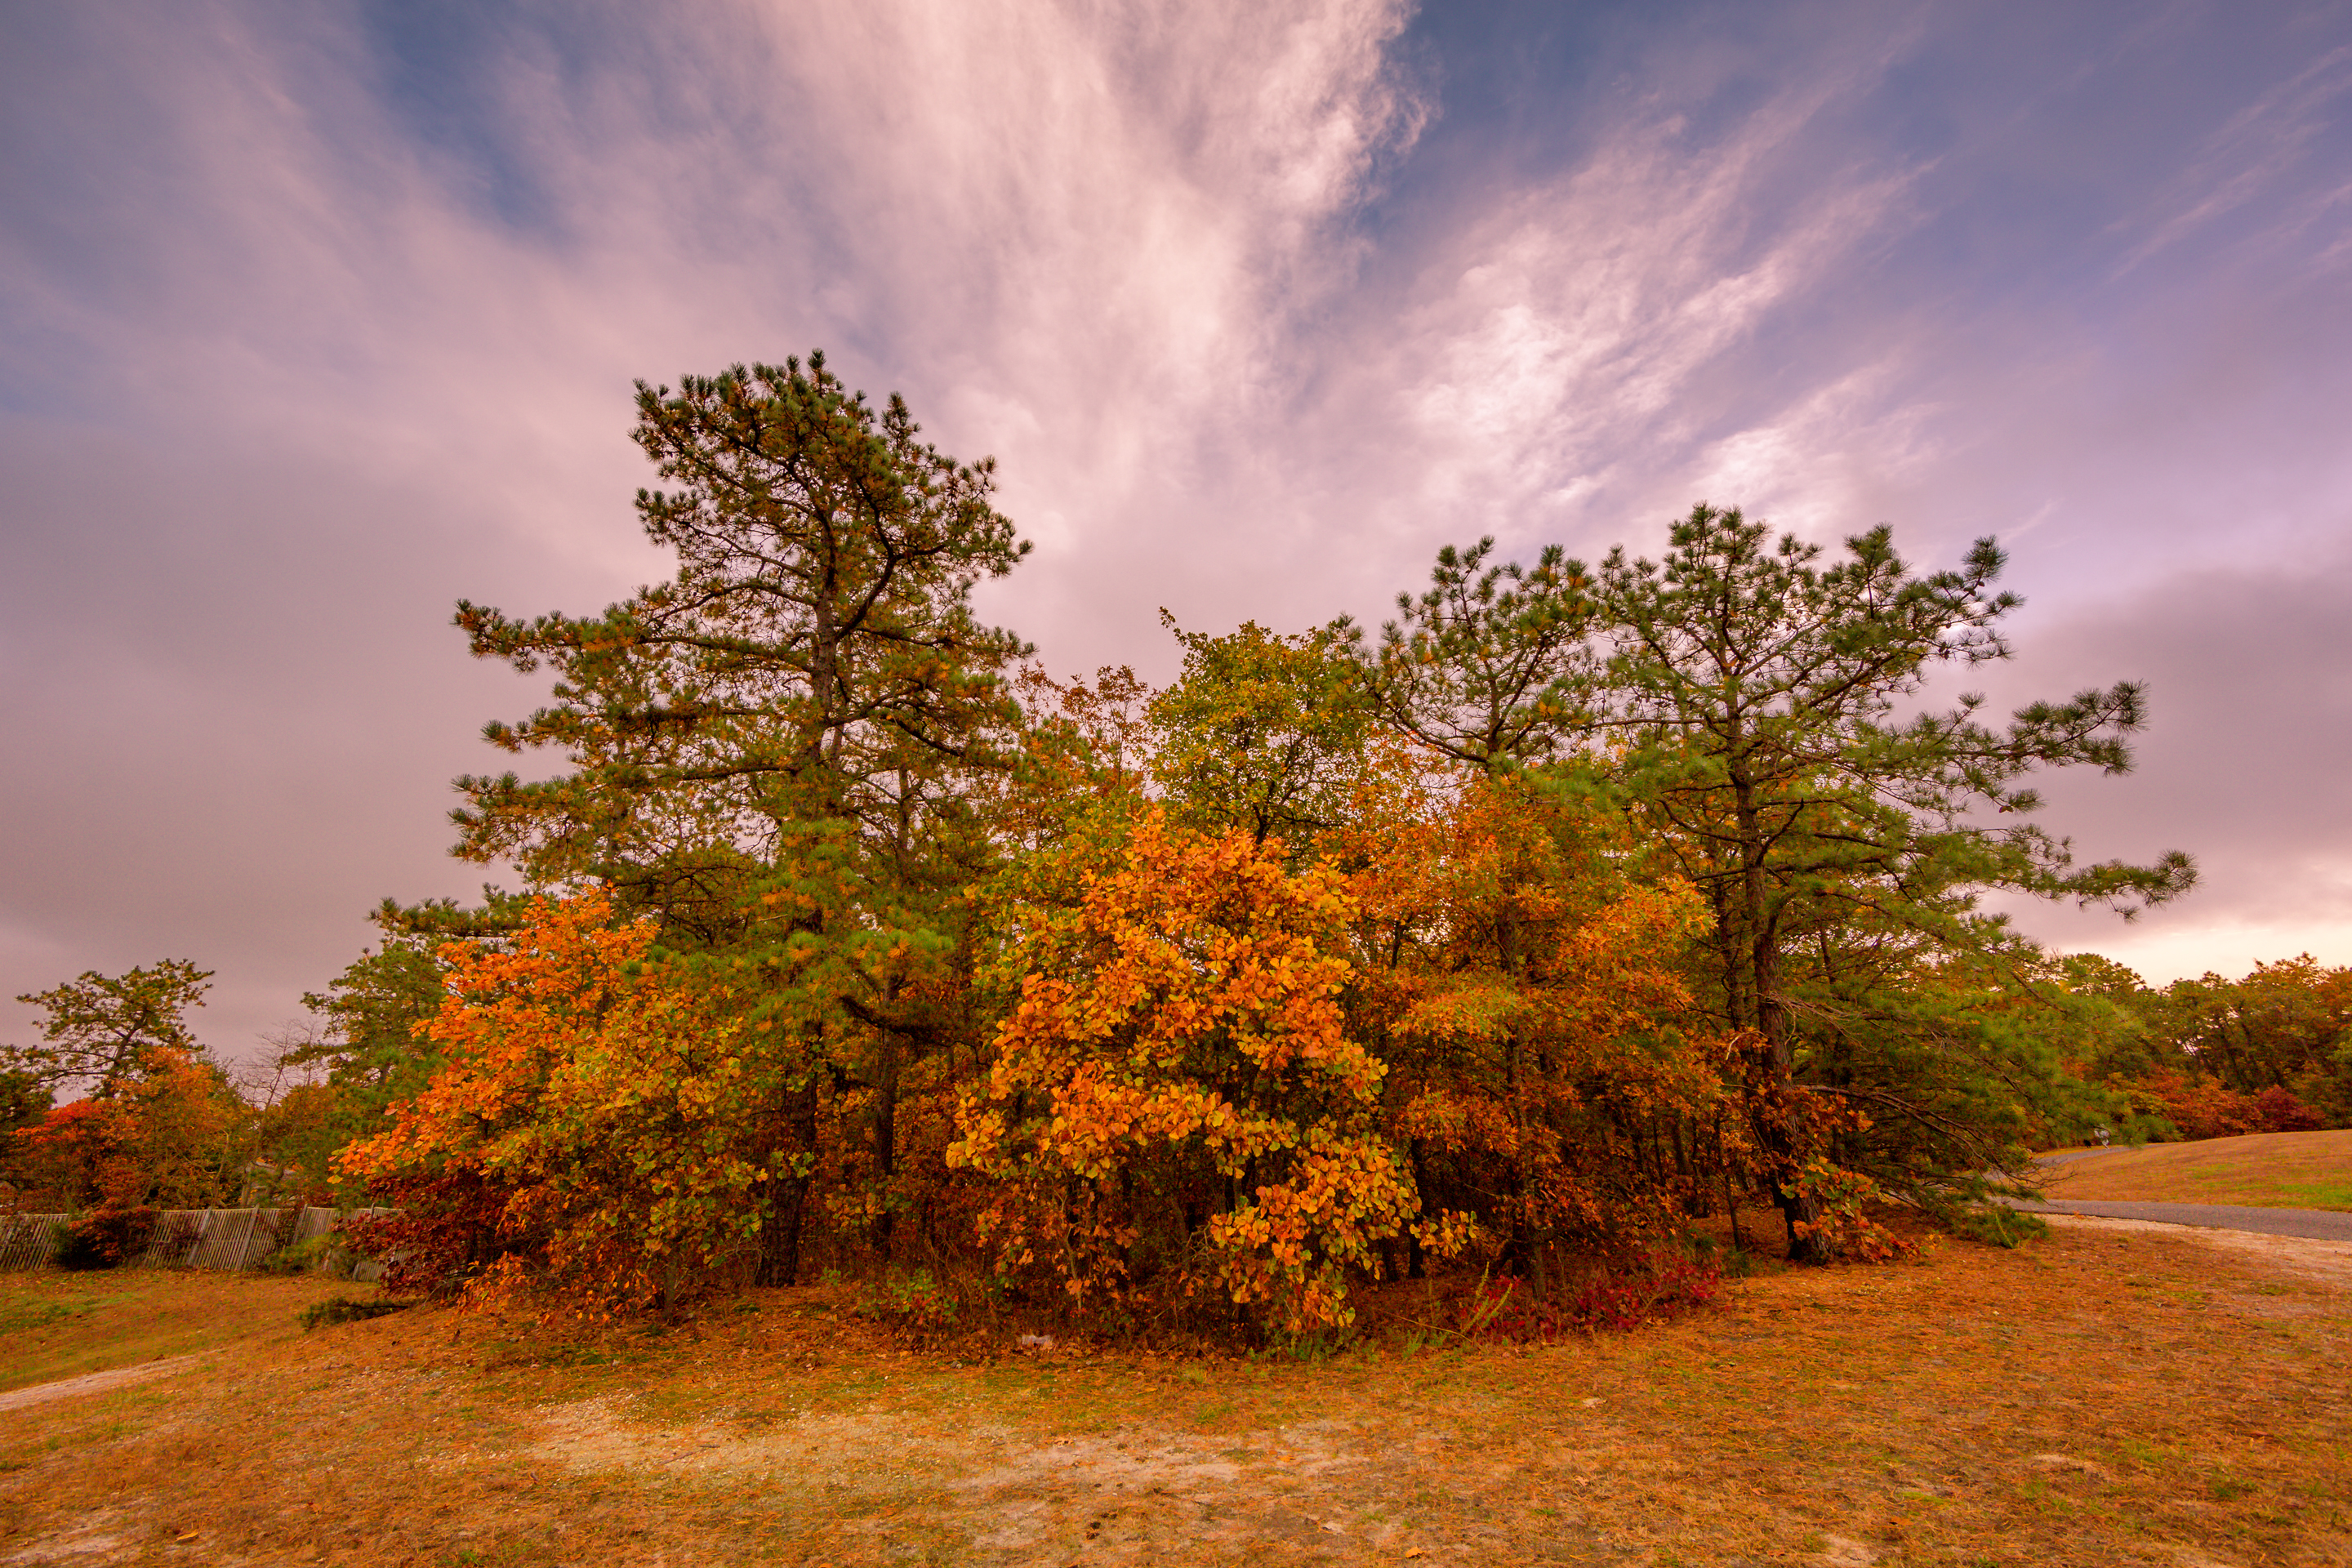 Landscape photo of fall foliage trees colored orange, red and yellow, mixed with green pines.